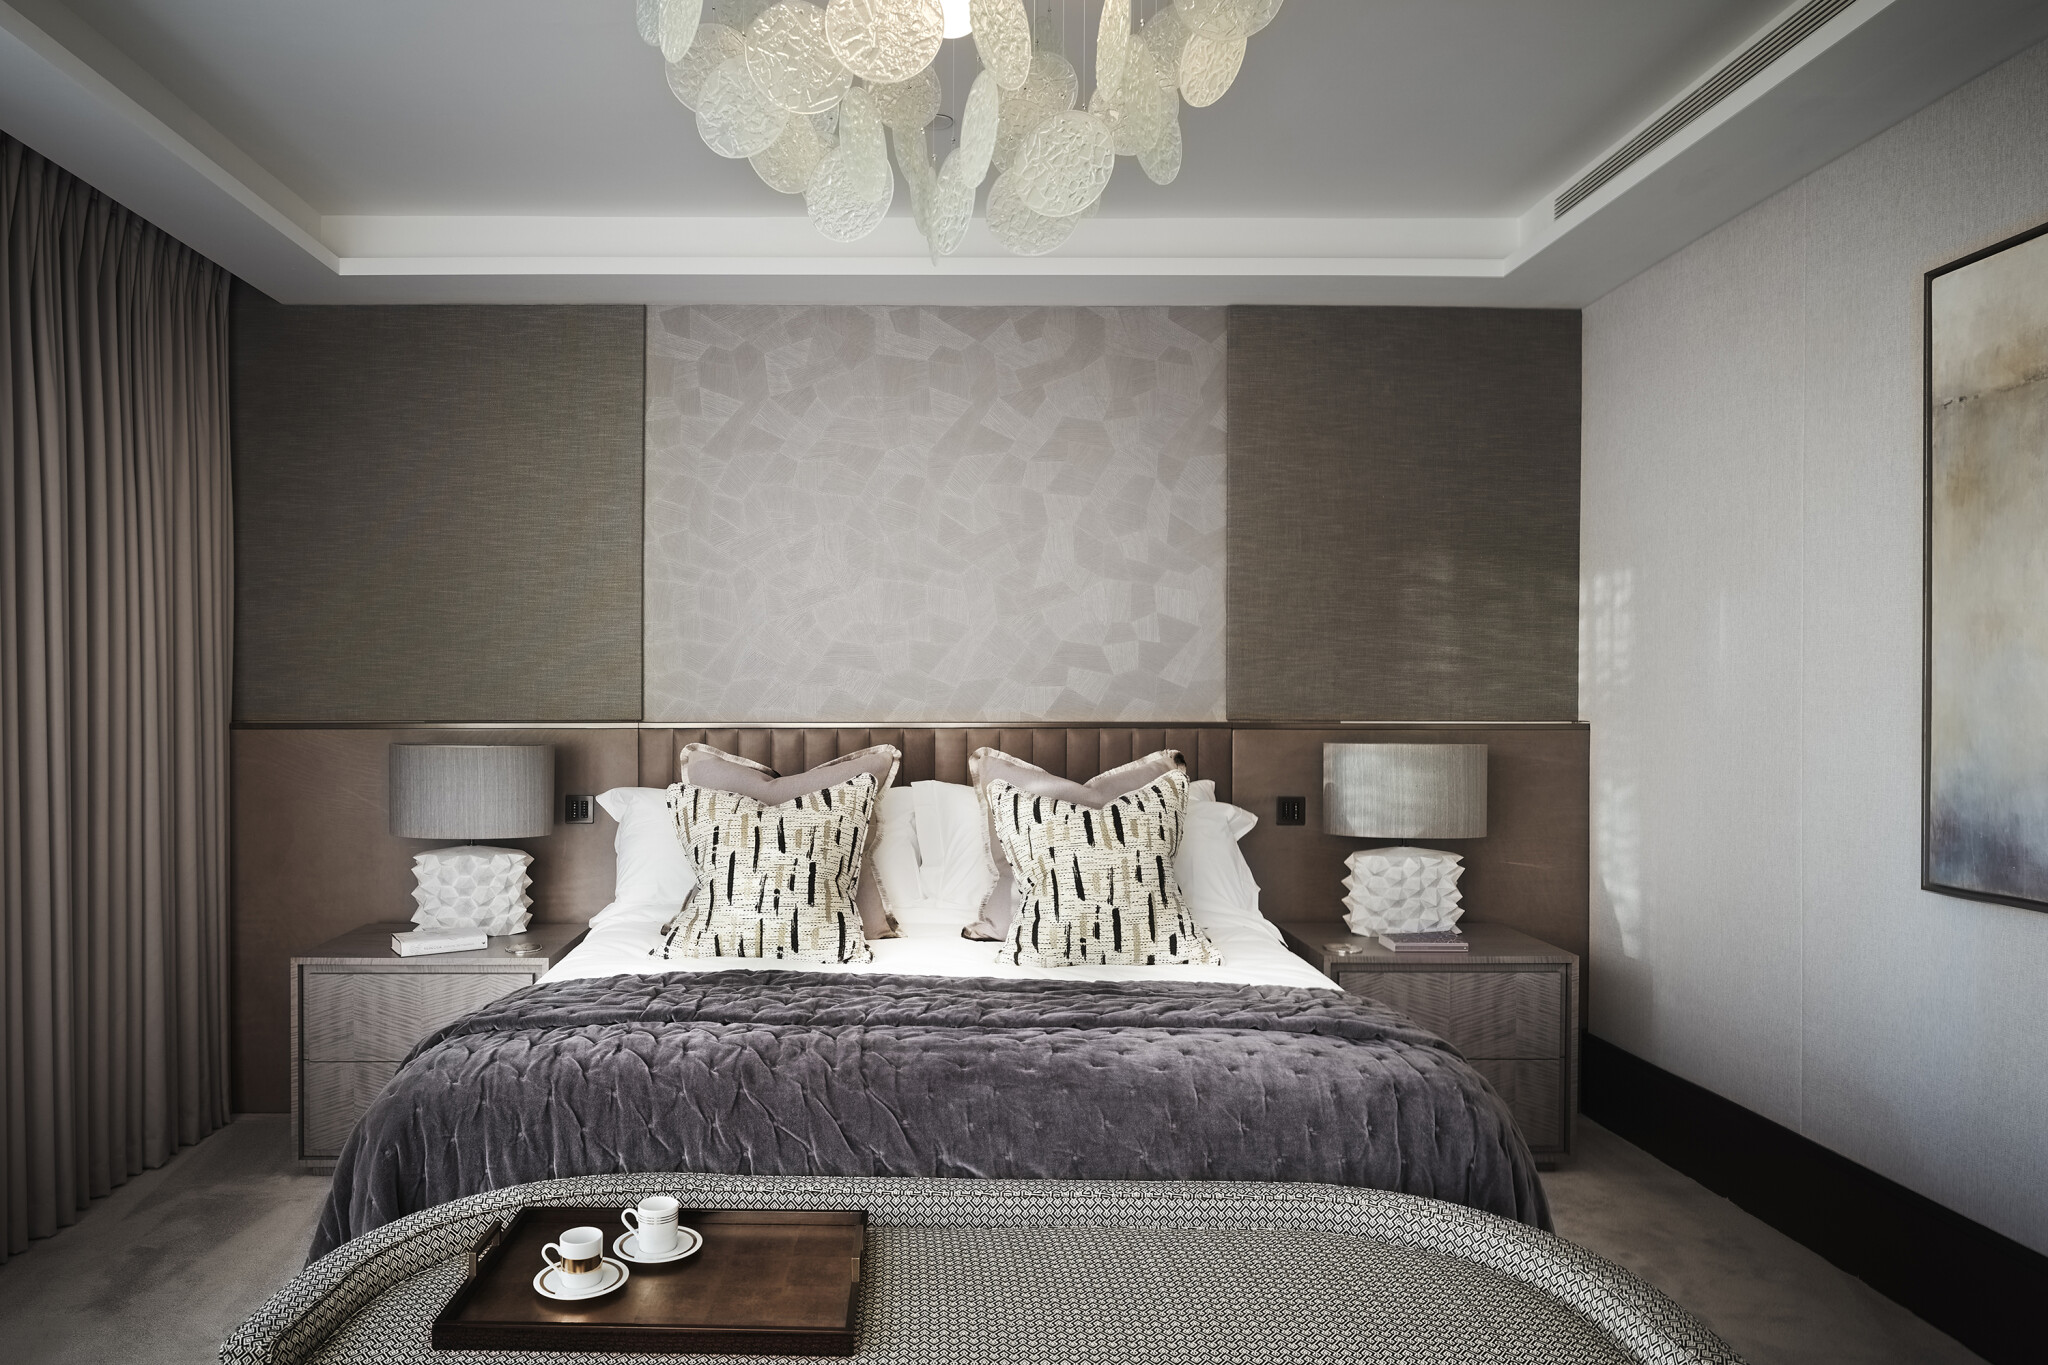 GUEST BEDROOM_BELVEDERE PENTHOUSE_Loomah Bespoke Carpets & Rugs_Interior Design By Goddard Littlefair_Photography By Mel Yates